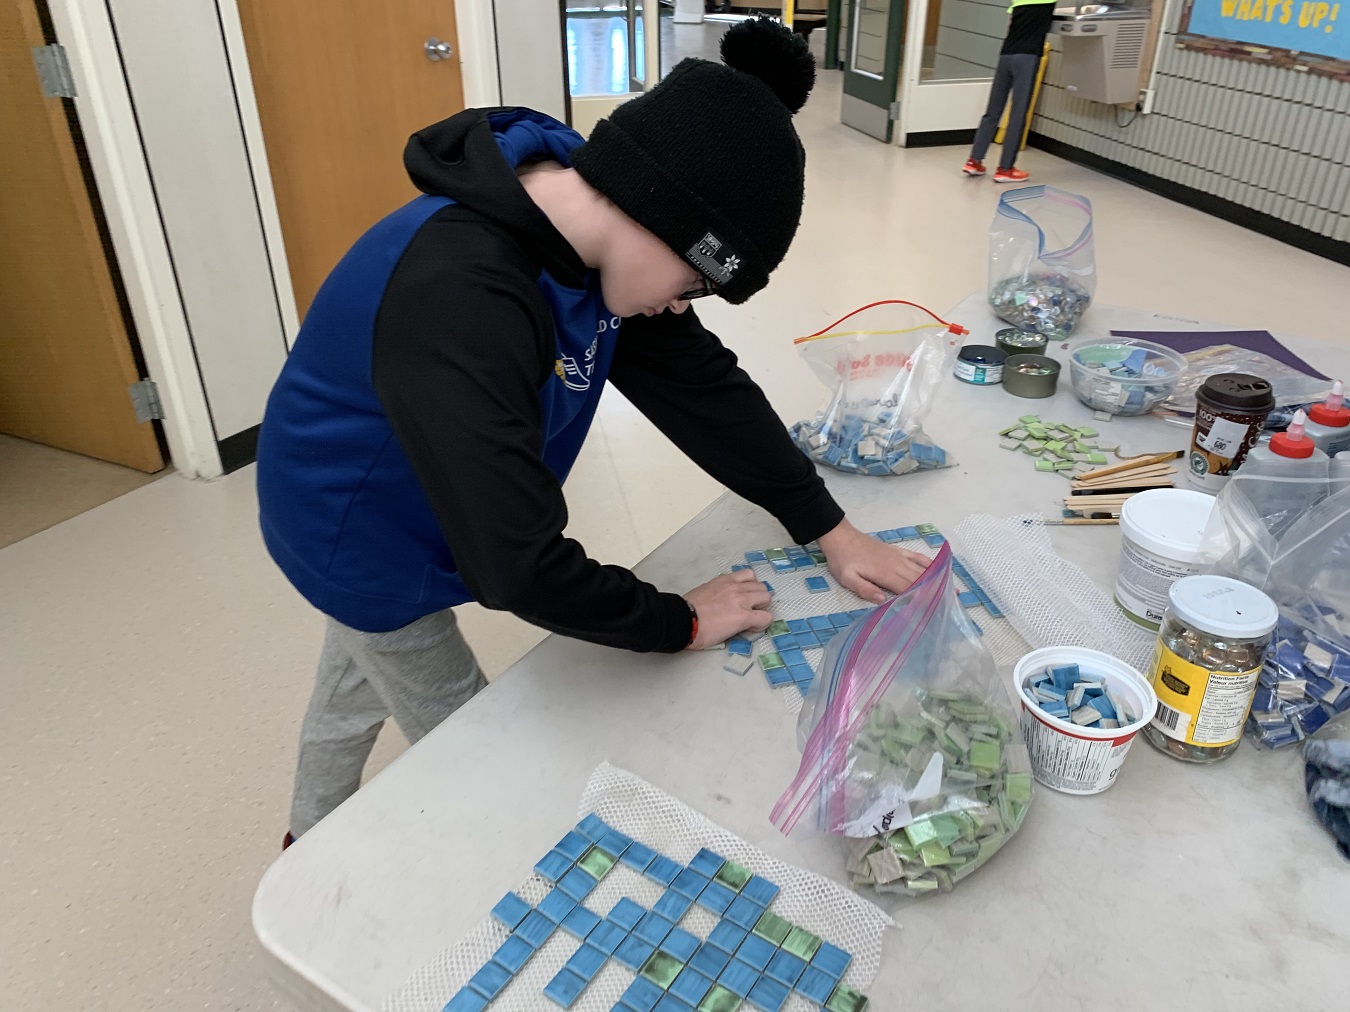 A student uses tiles to create a mosaic.